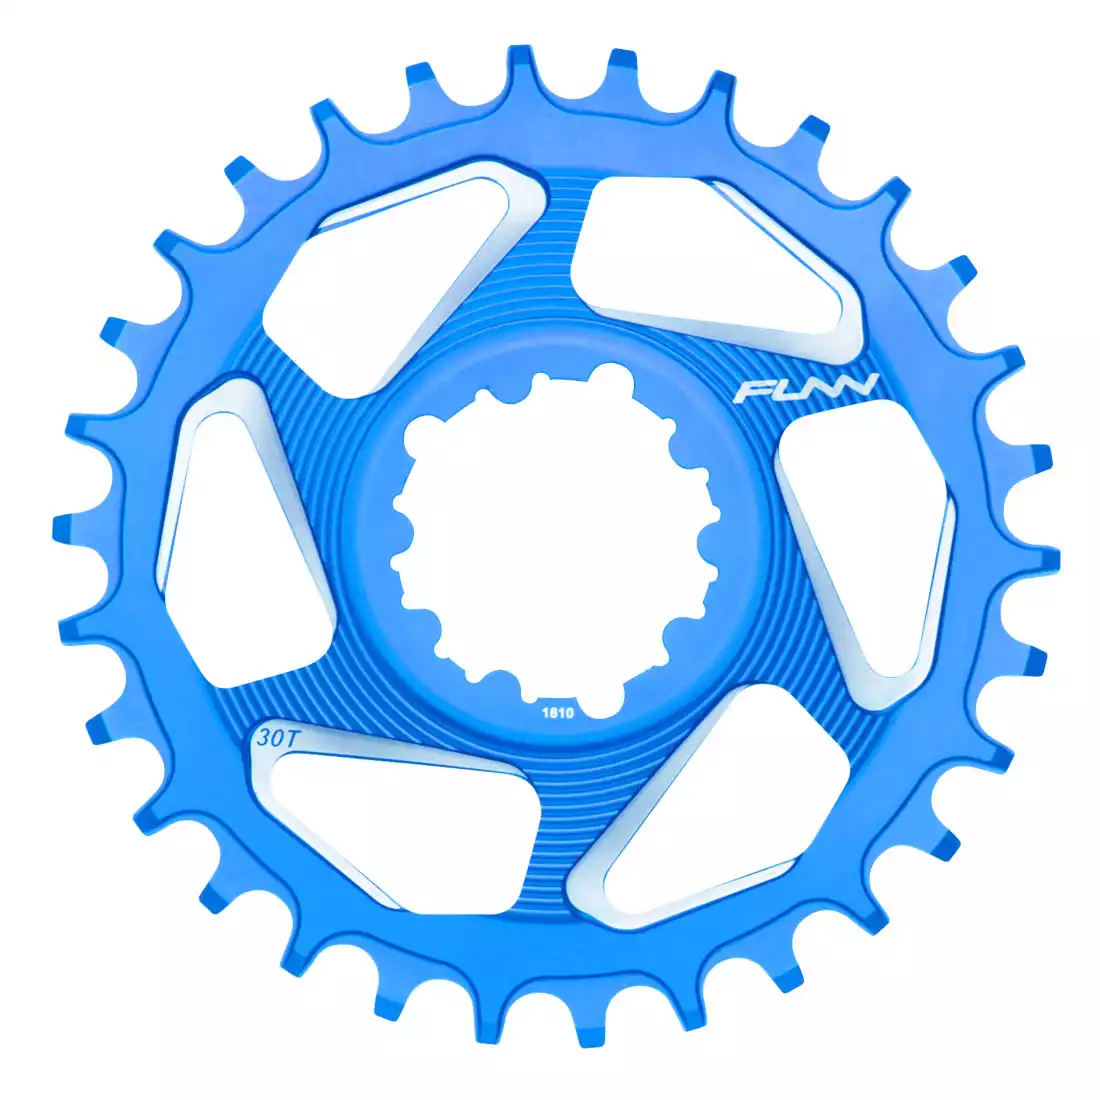 FUNN SOLO DX NARROW-WIDE BOOST 28T blue sprocket for bicycle crank